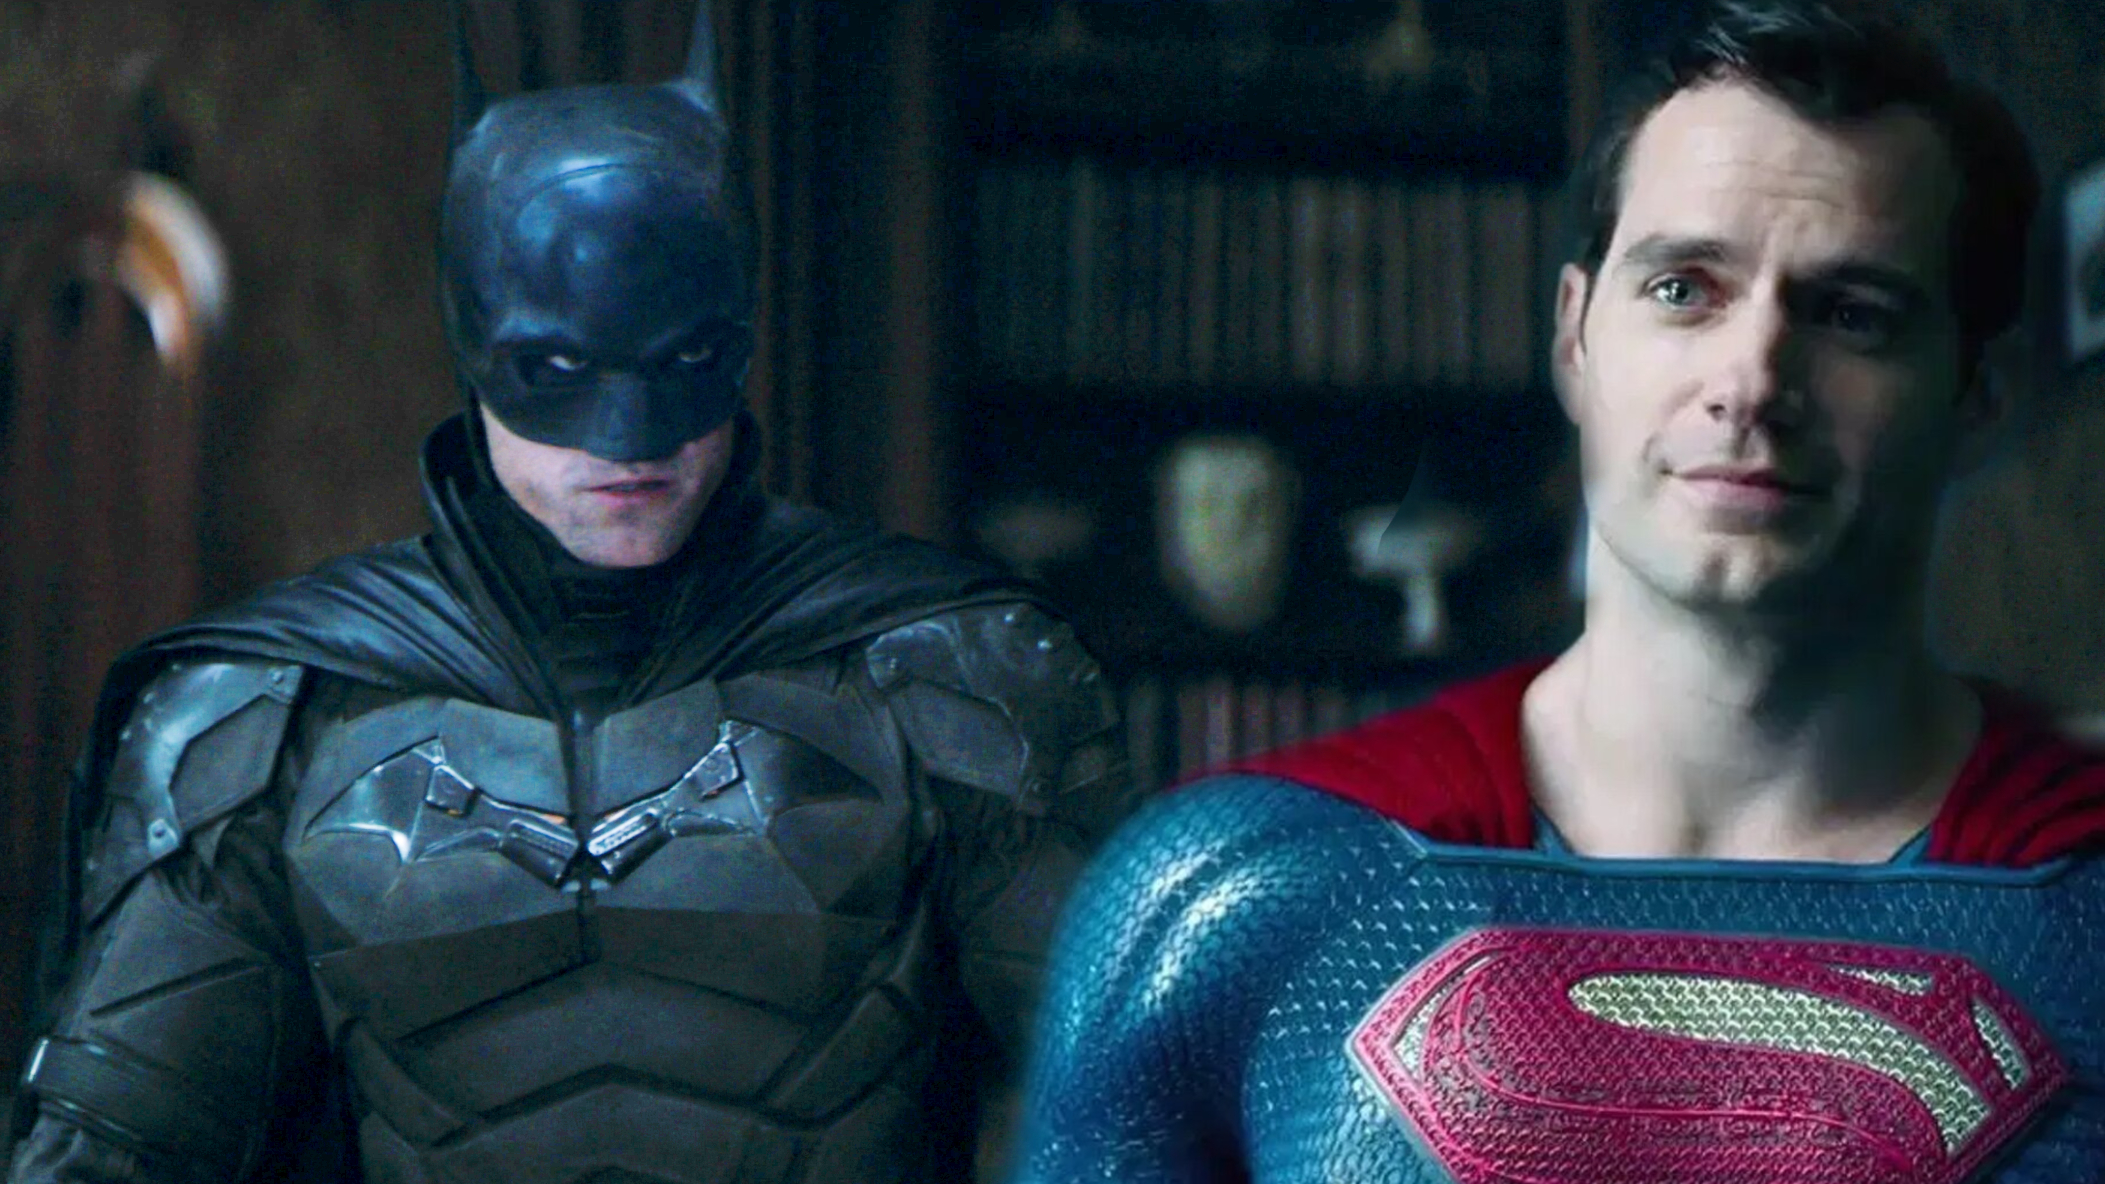 Batman v Superman' Star Henry Cavill: 5 Things to Know About Henry